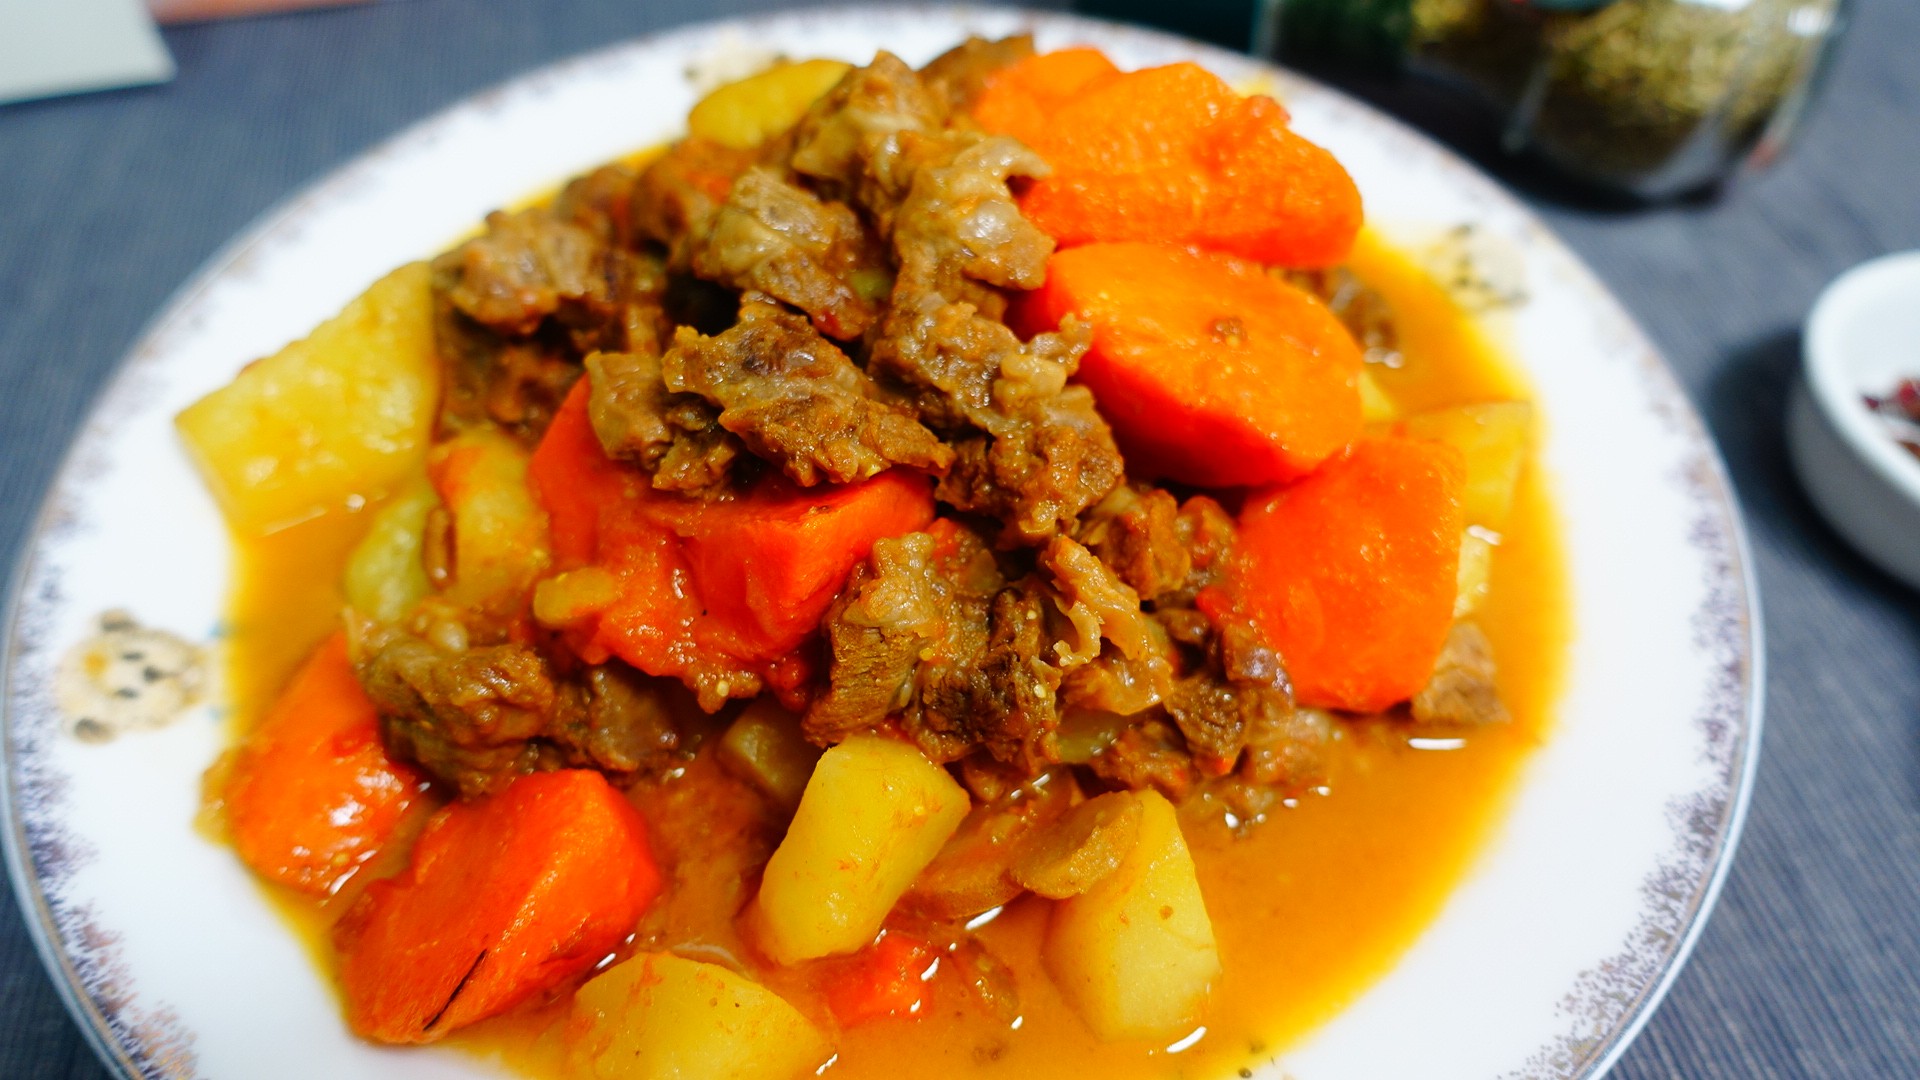 Braised Beef Ribs with Carrots, Potatoes and Tomatoes recipe